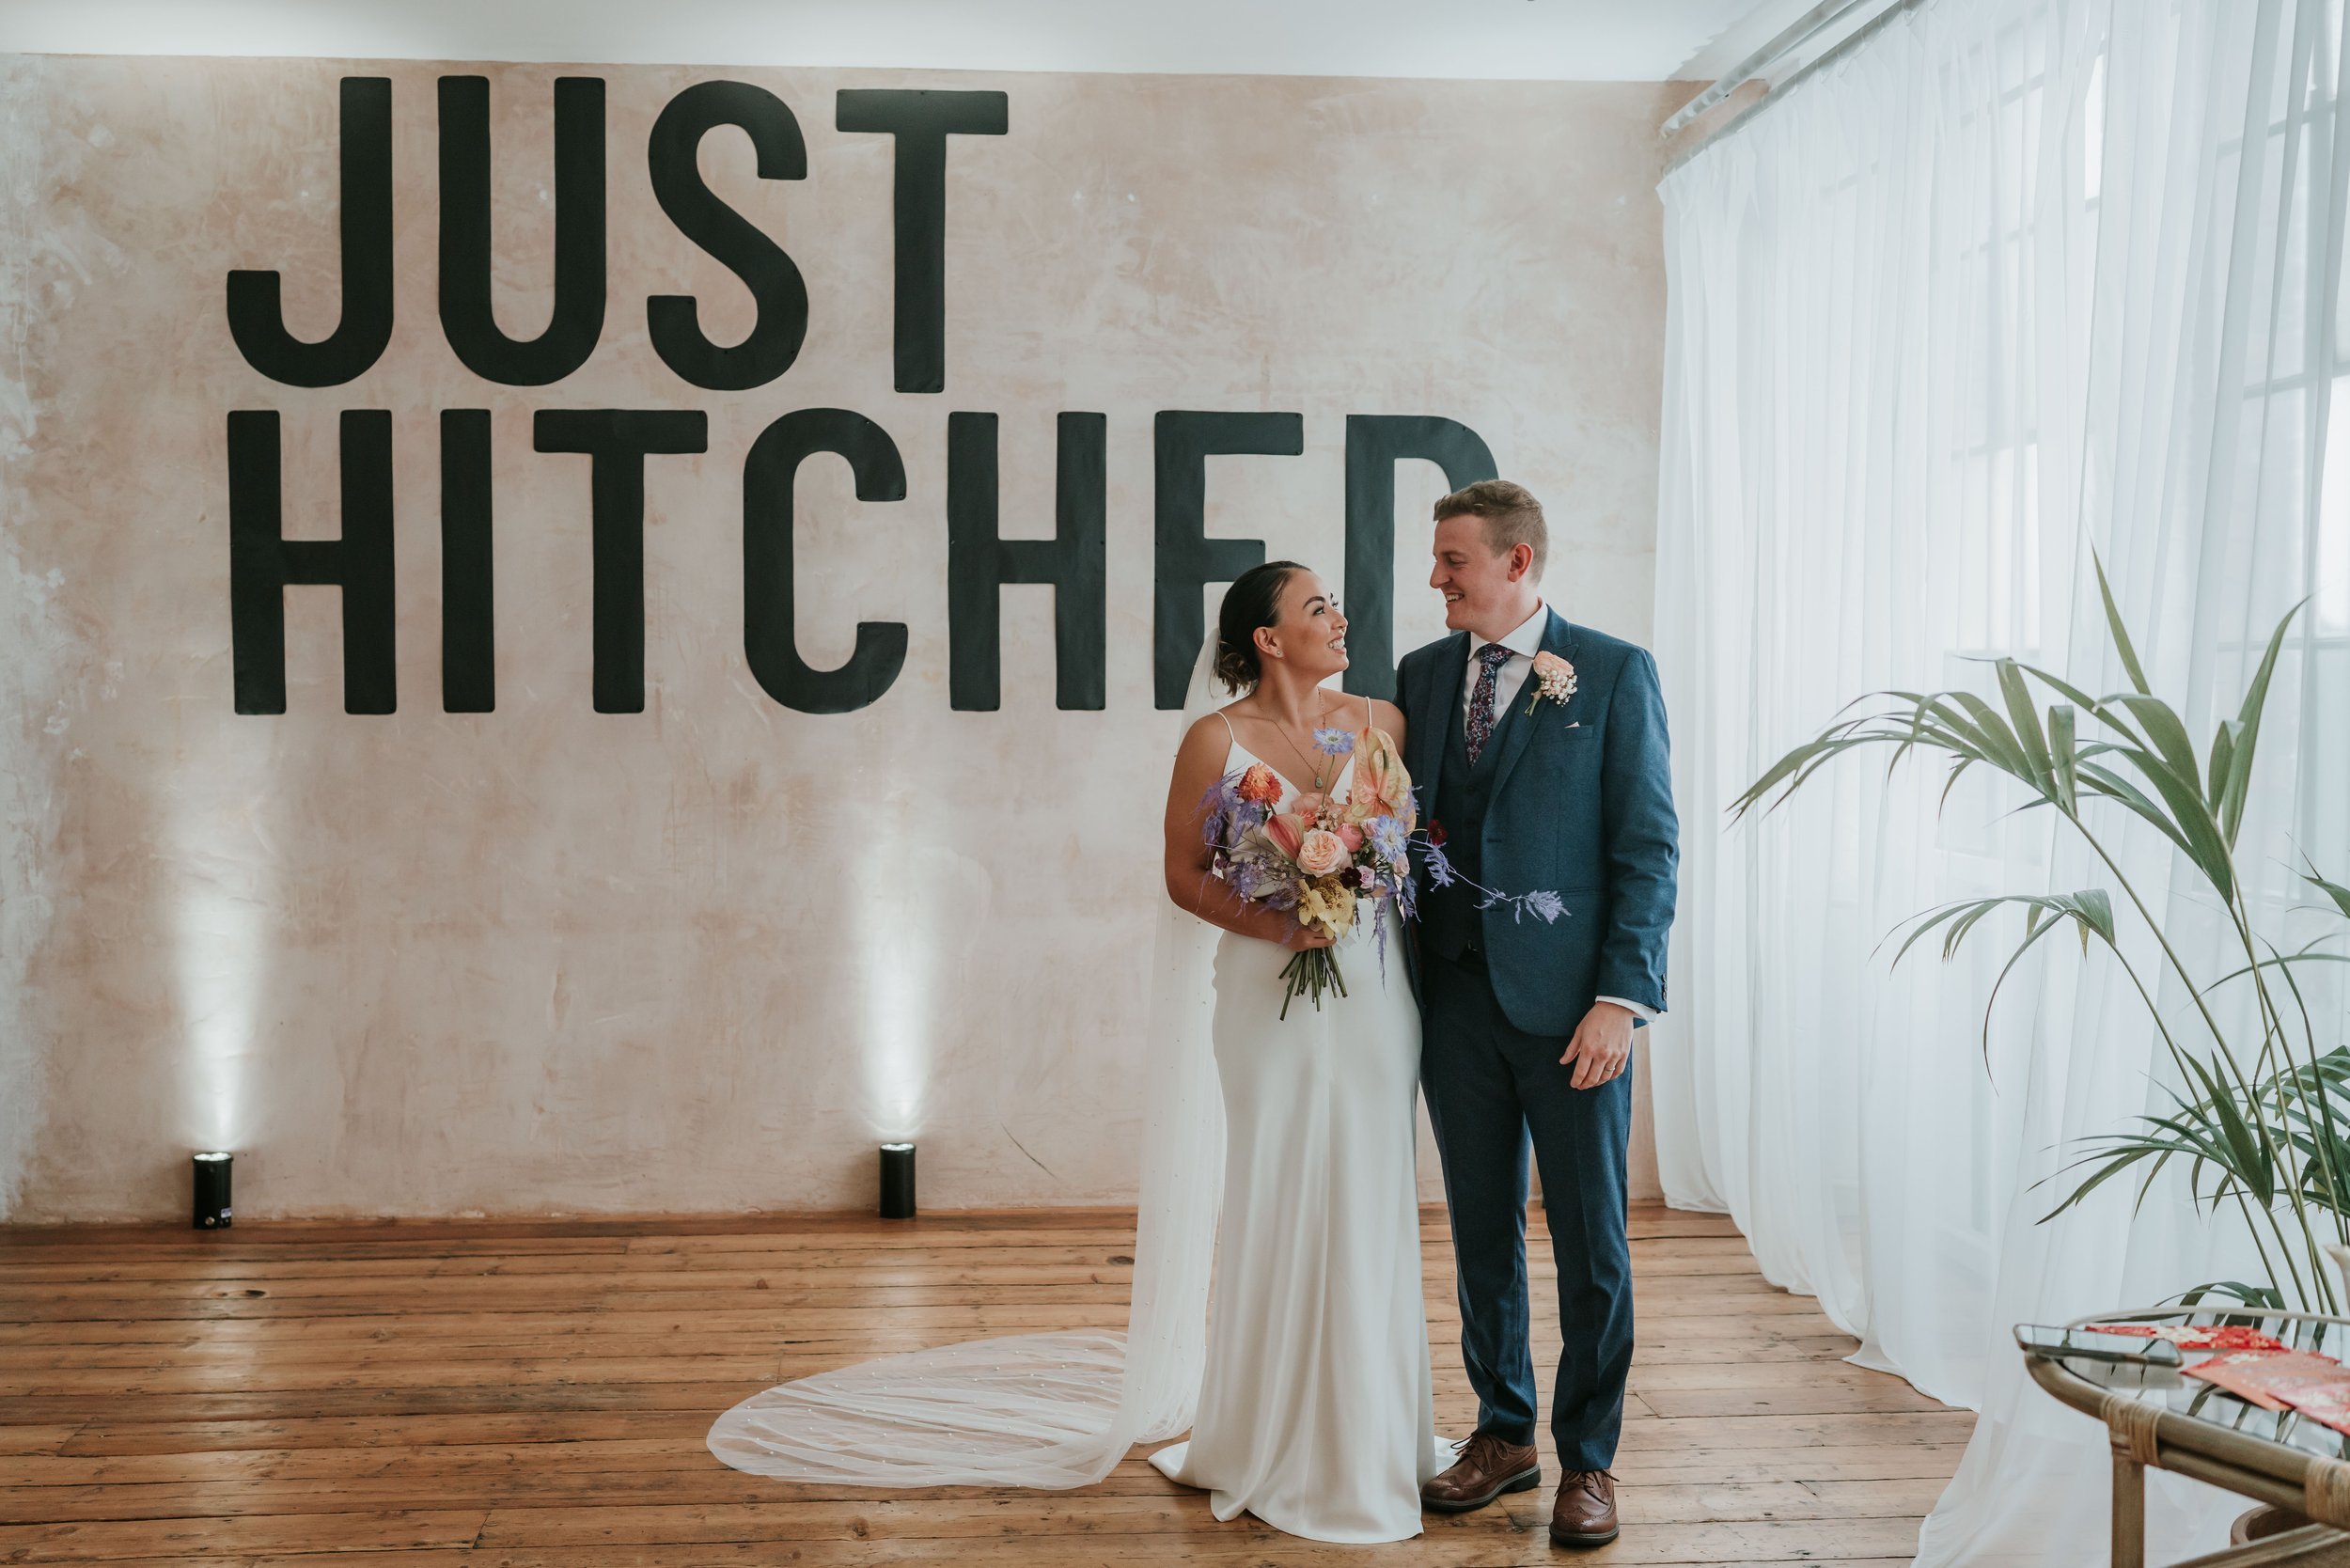 A married couple in front of a 'Just Hitched' sign